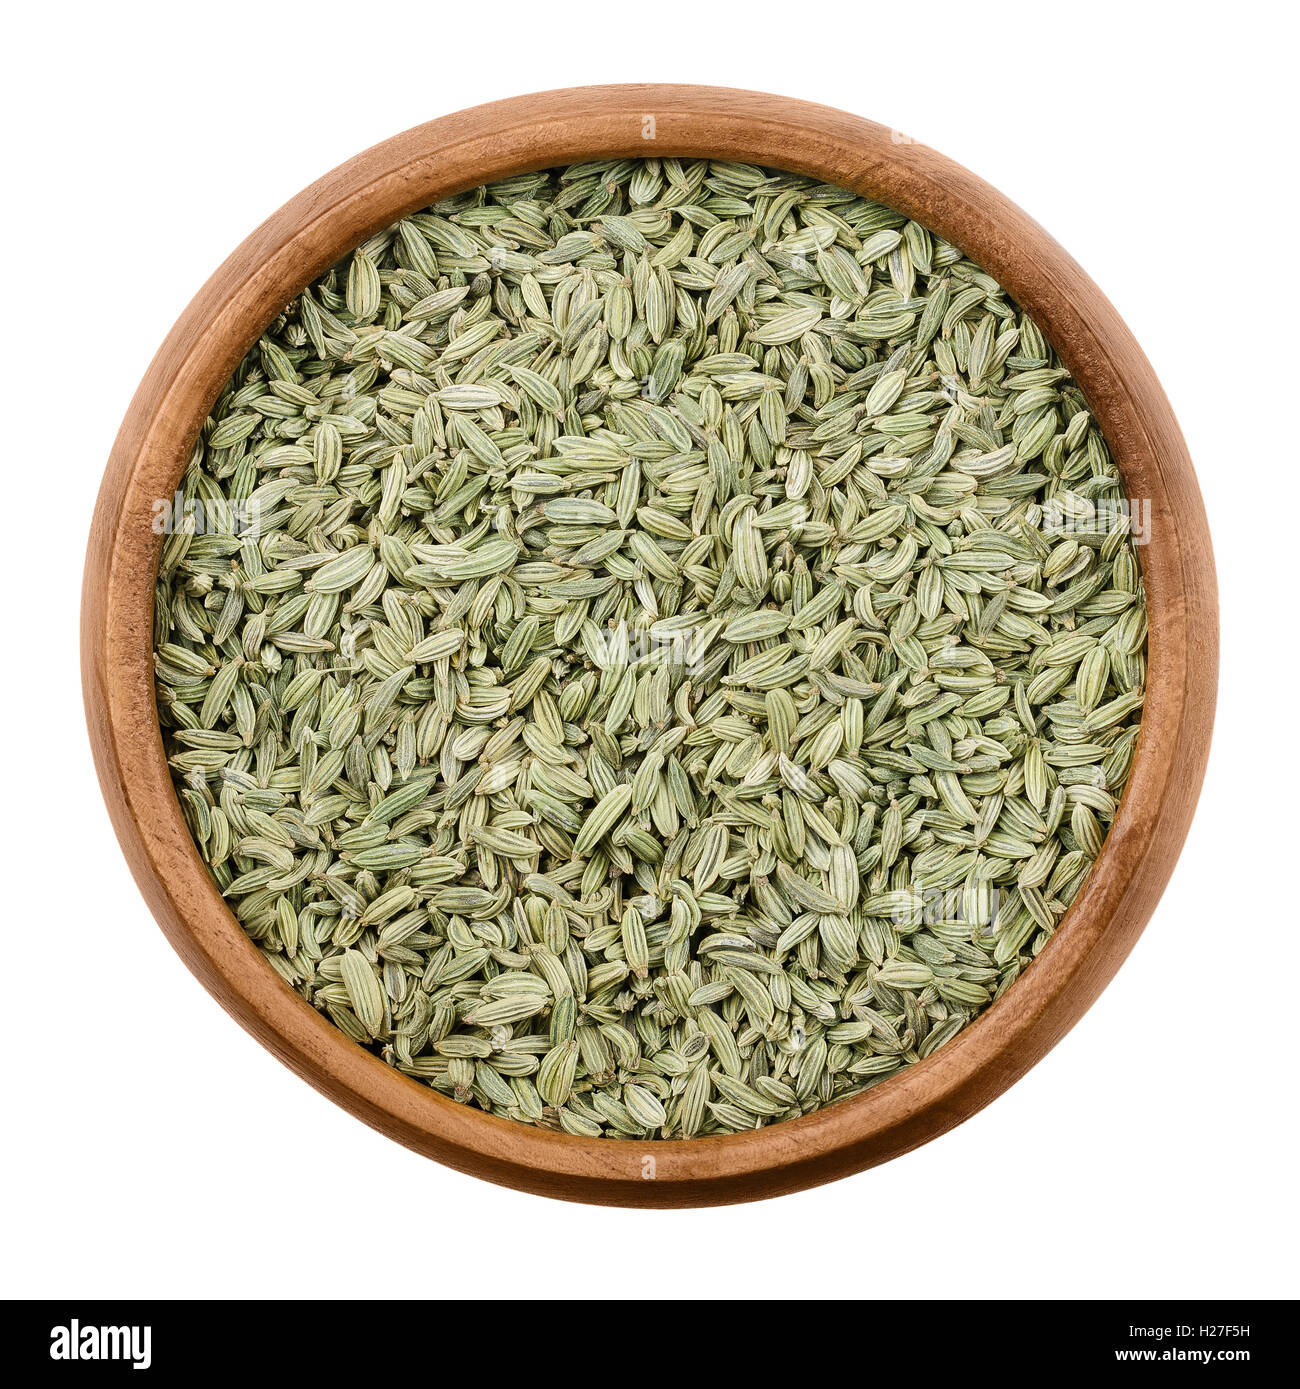 Fennel seeds in a wooden bowl on white background. Dried fruits of Foeniculum vulgare, an aromatic and flavorful herb. Stock Photo